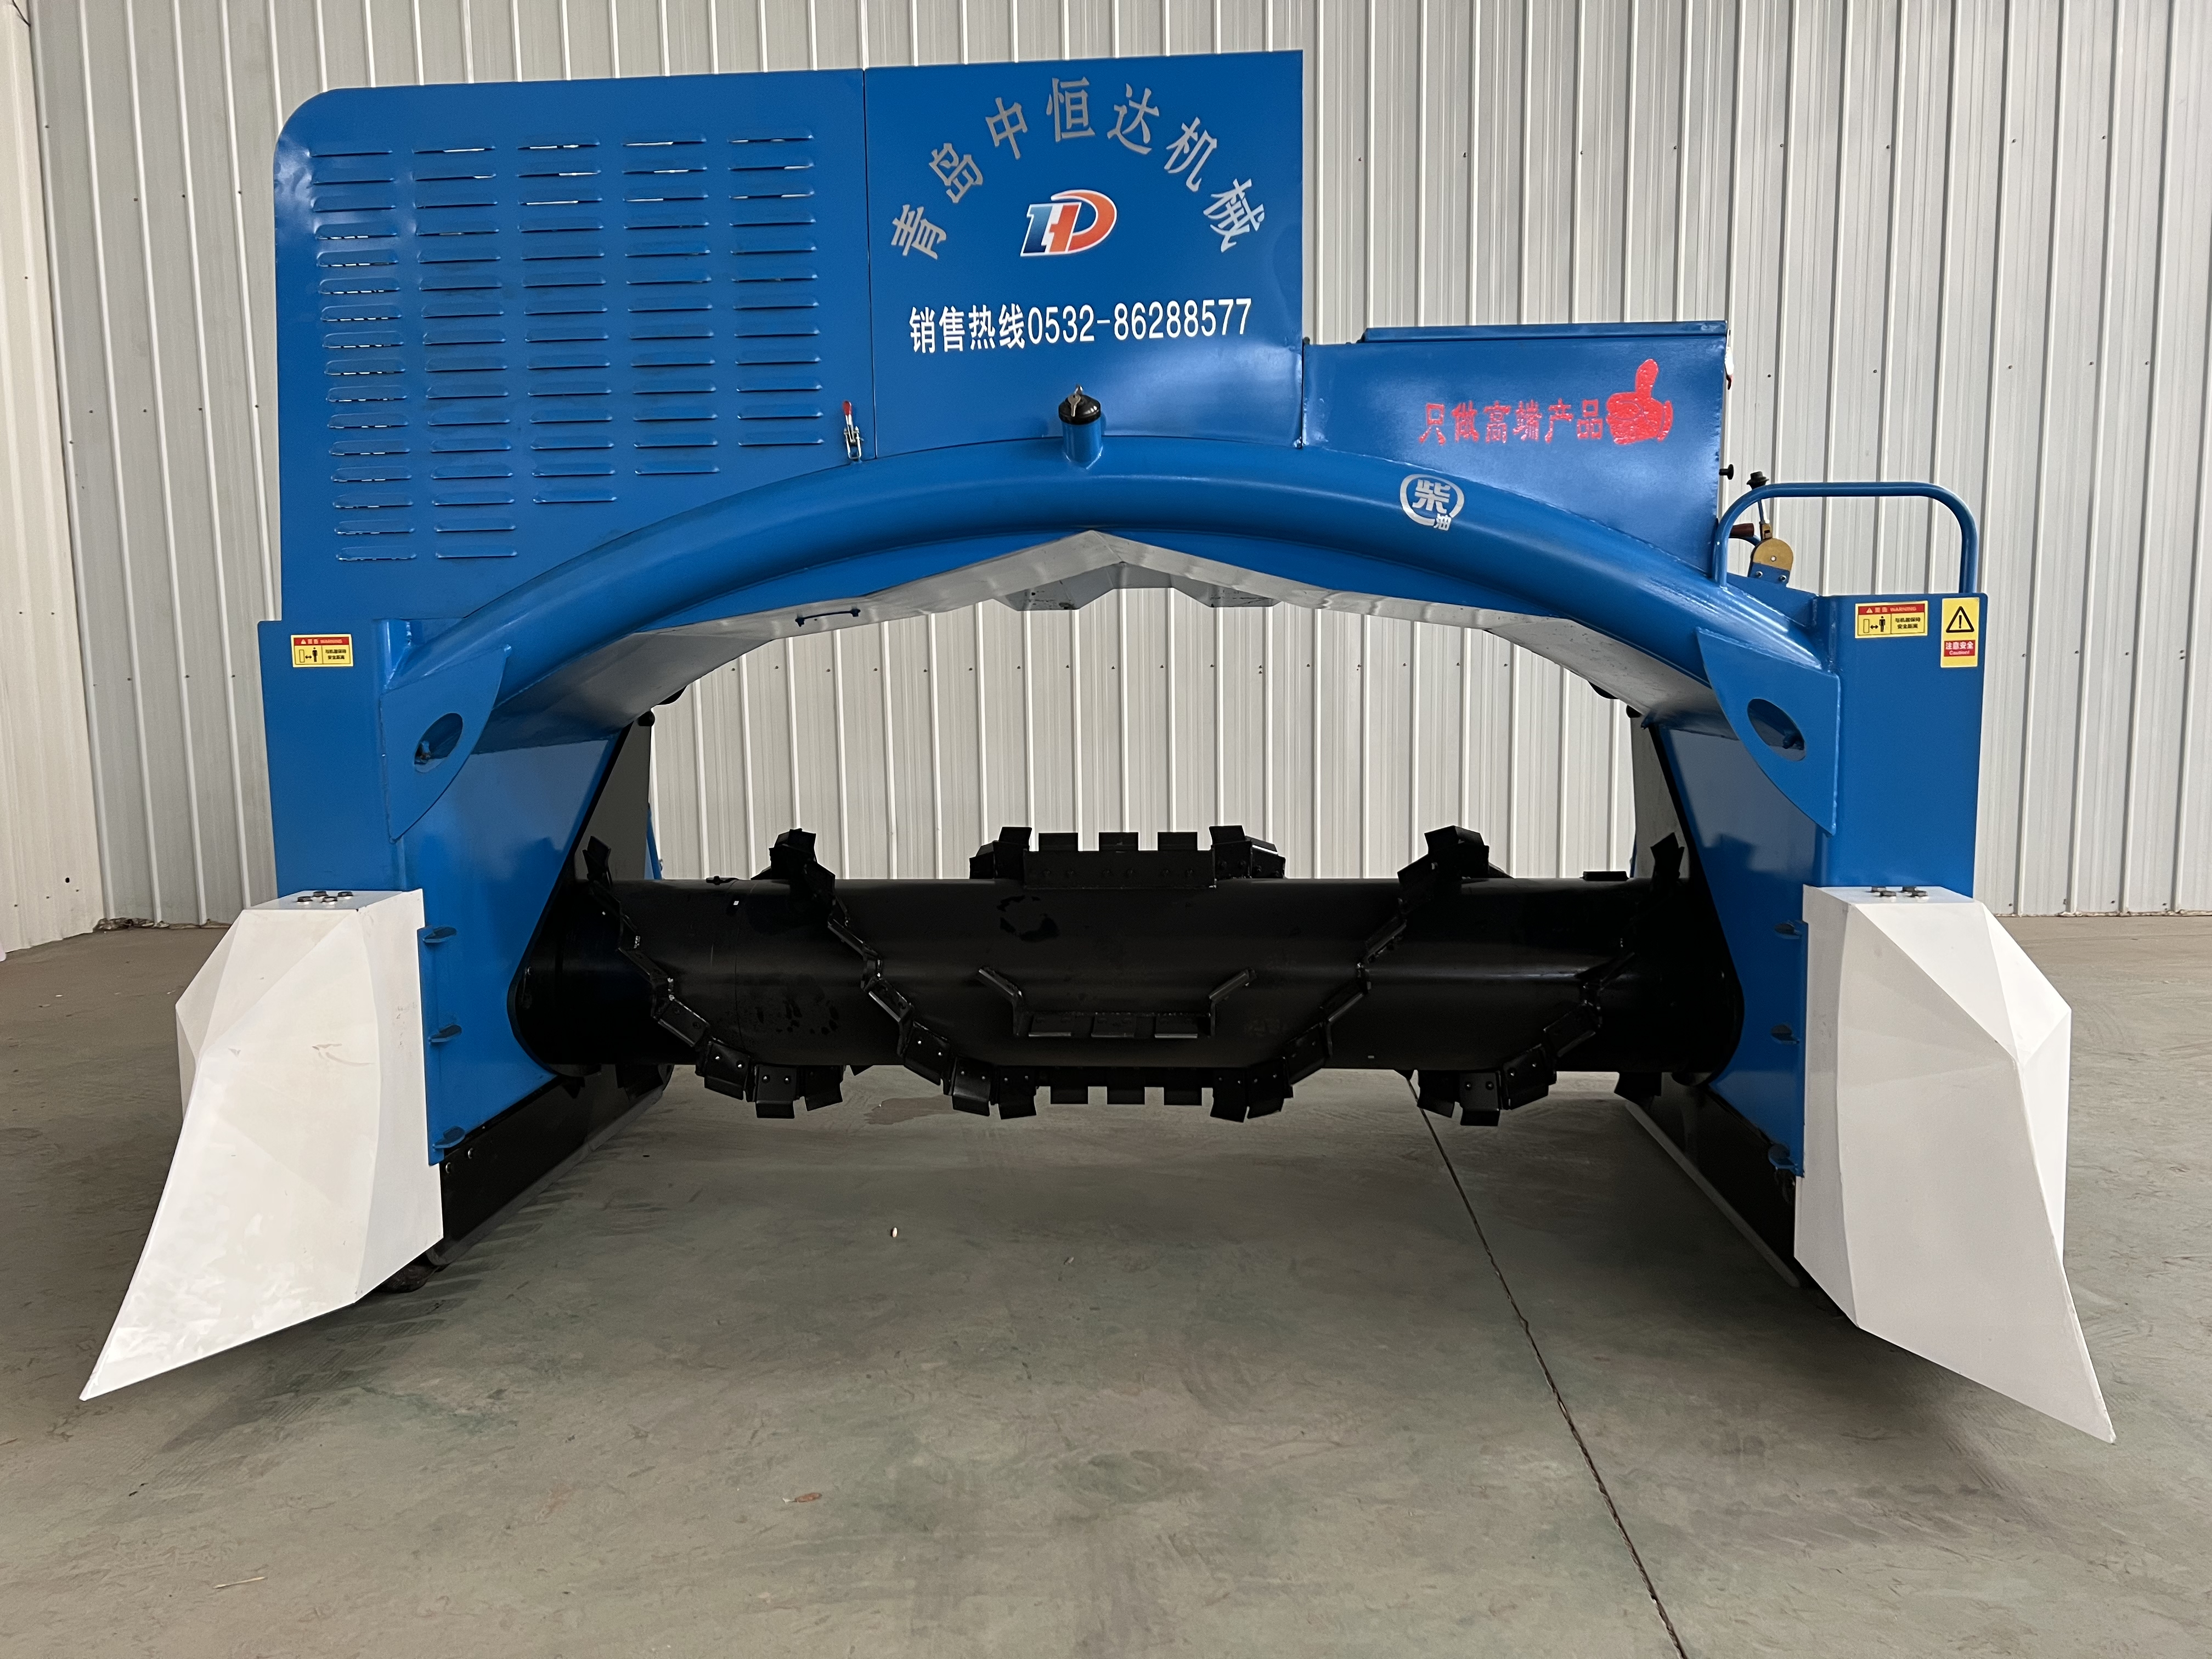 How to Prolong the Service Life of Hydraulic Compost Turner?